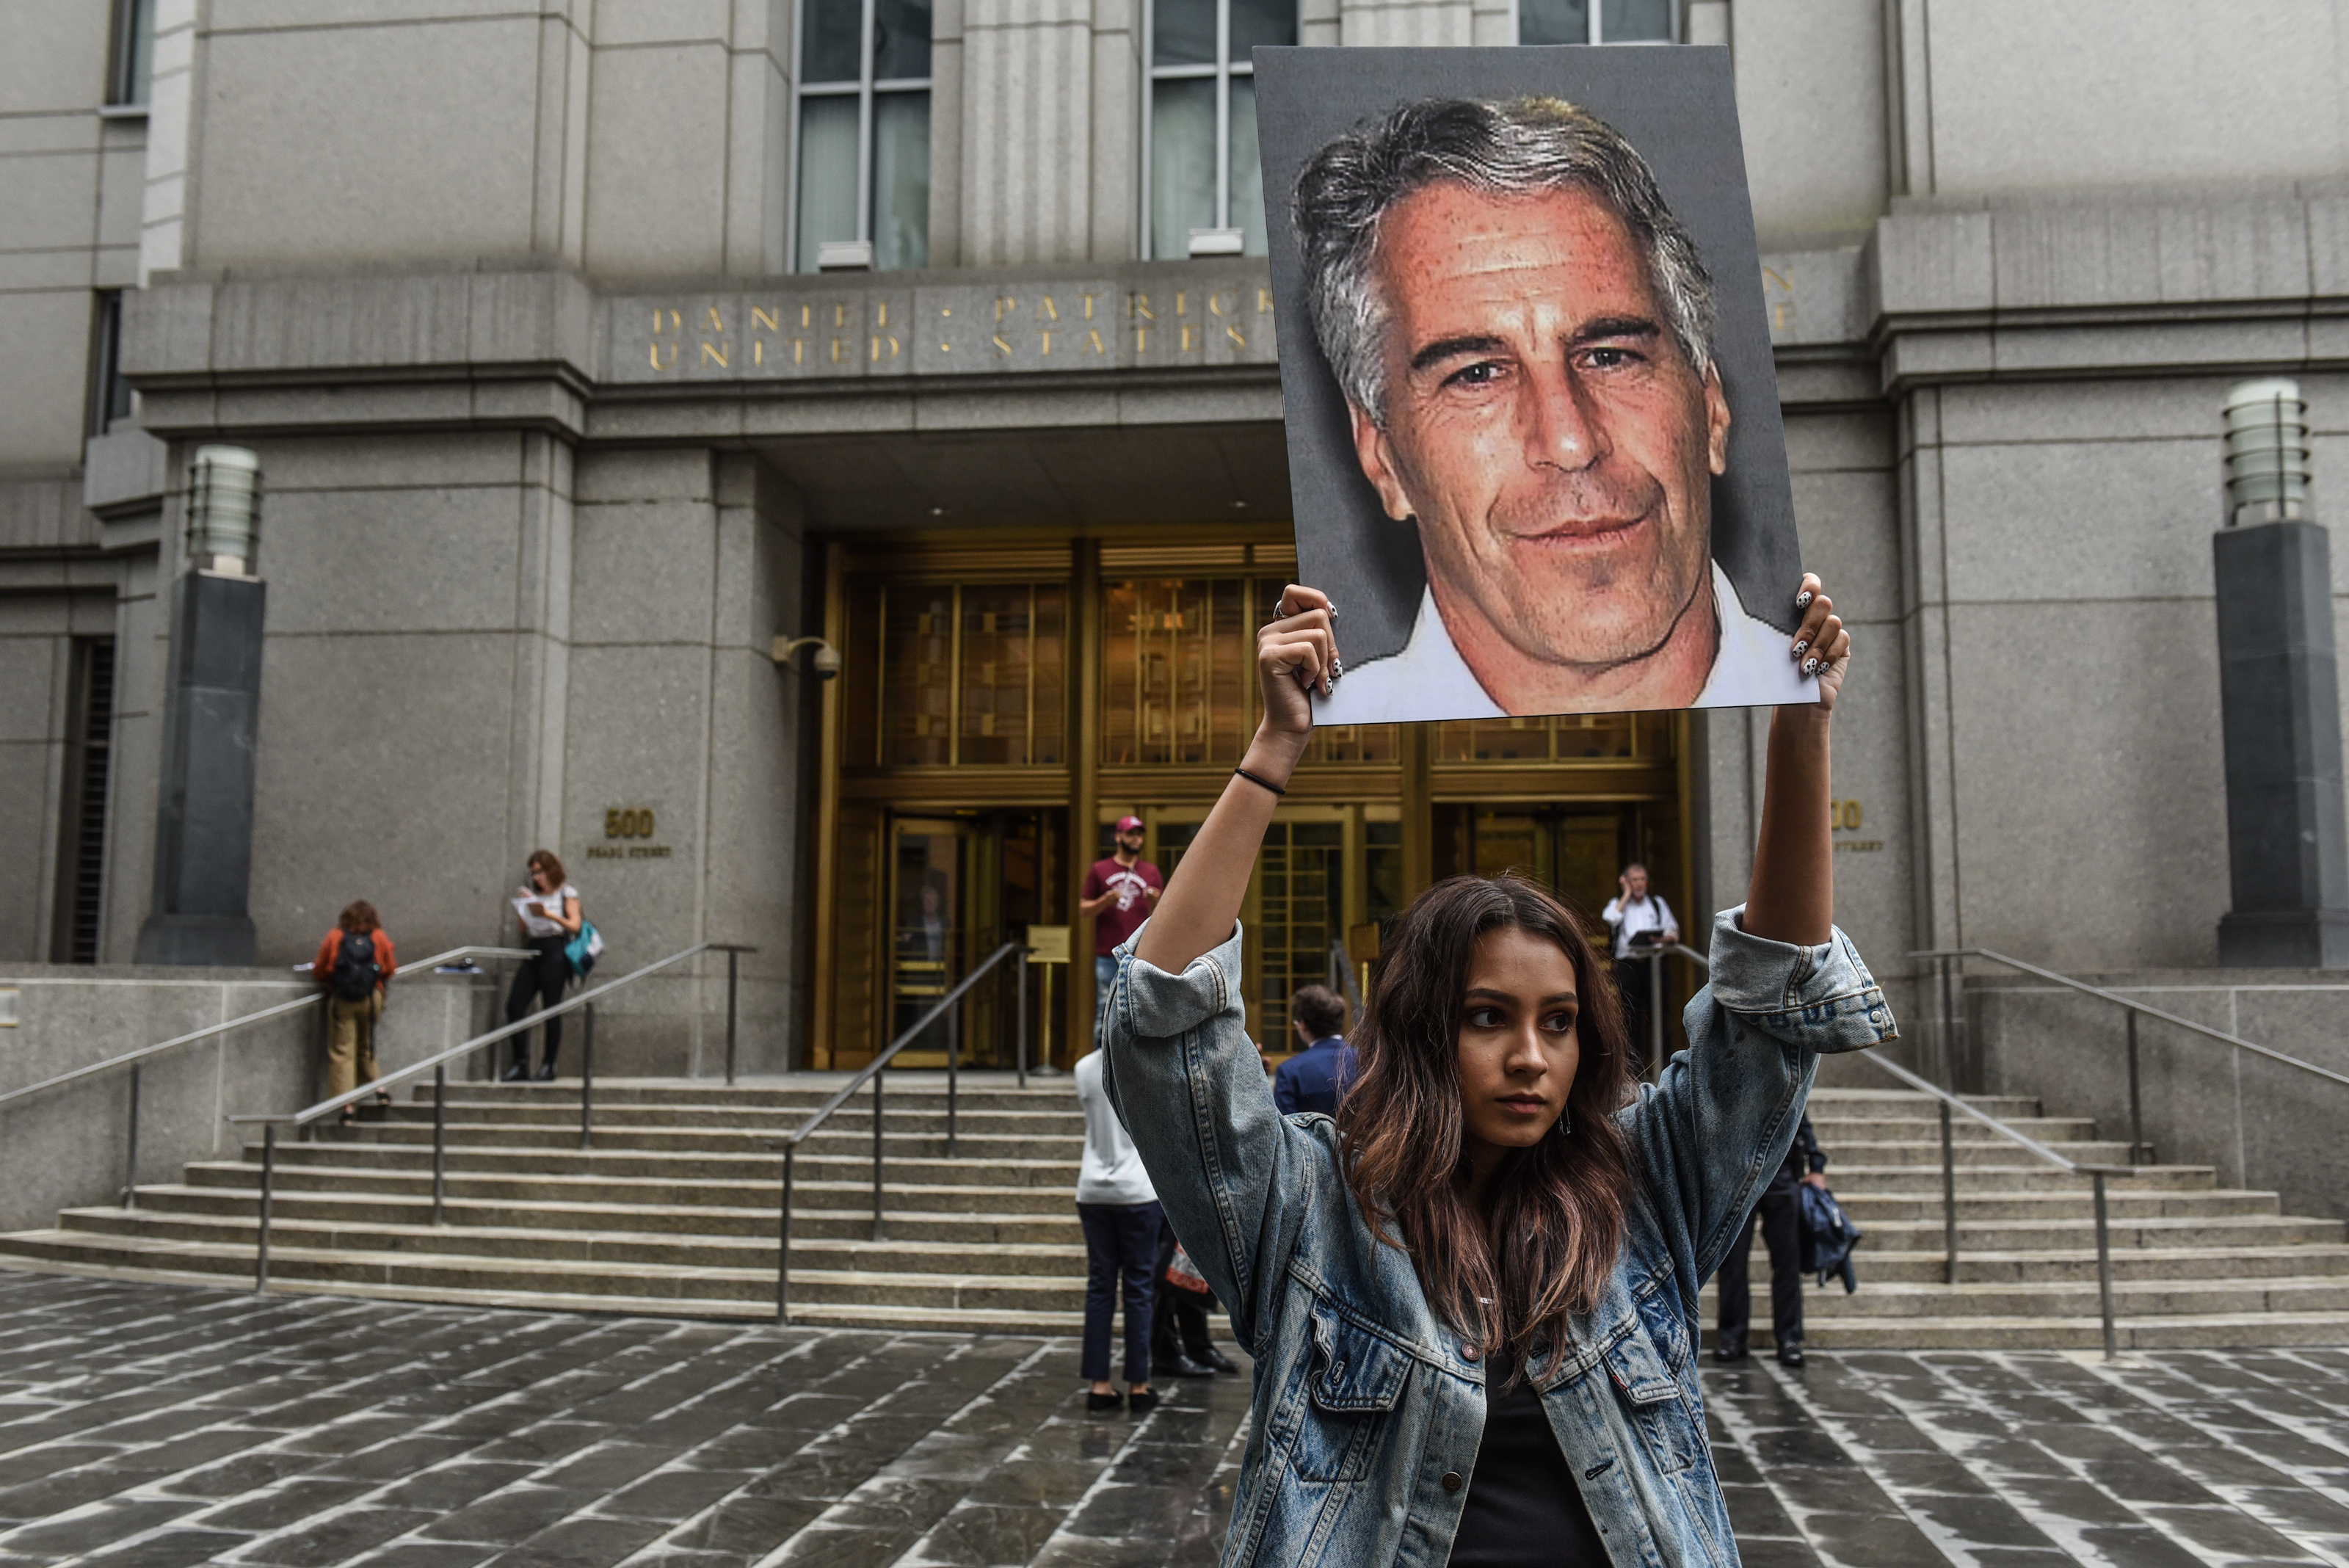 NEW YORK, NY - JULY 08: A protest group called "Hot Mess" hold up signs of Jeffrey Epstein in front of the federal courthouse on July 8, 2019 in New York City. According to reports, Epstein will be charged with one count of sex trafficking of minors and one count of conspiracy to engage in sex trafficking of minors. (Photo by Stephanie Keith/Getty Images)